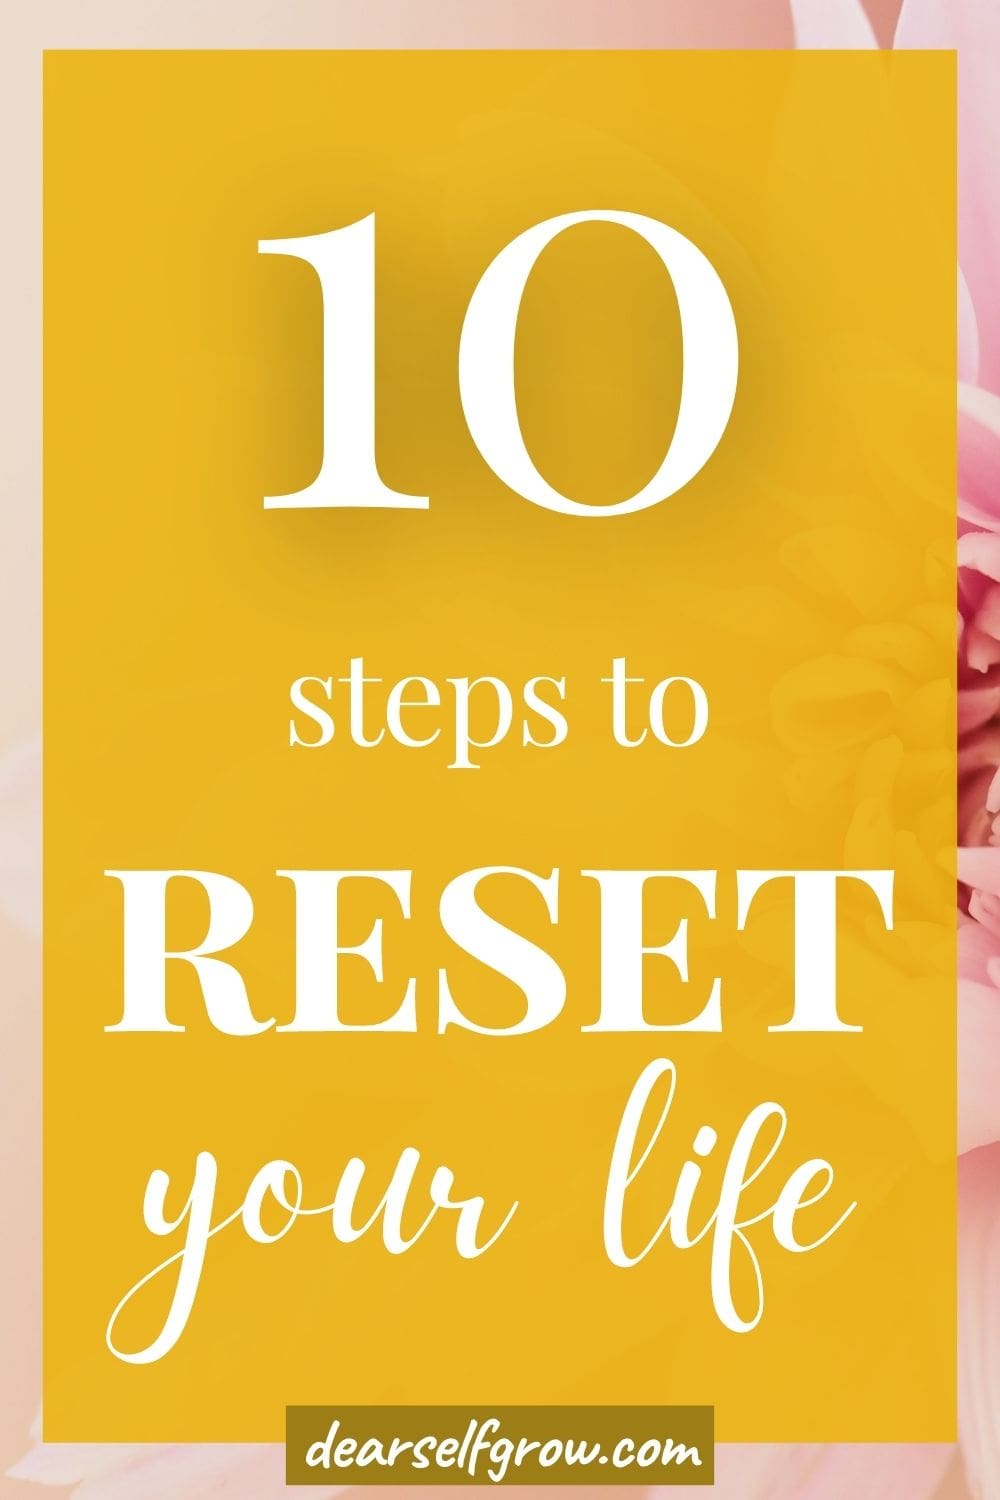 A pin image with text overlay that says "10 steps to reset your life" written in a yellow rectangle. The background is a pink flower.